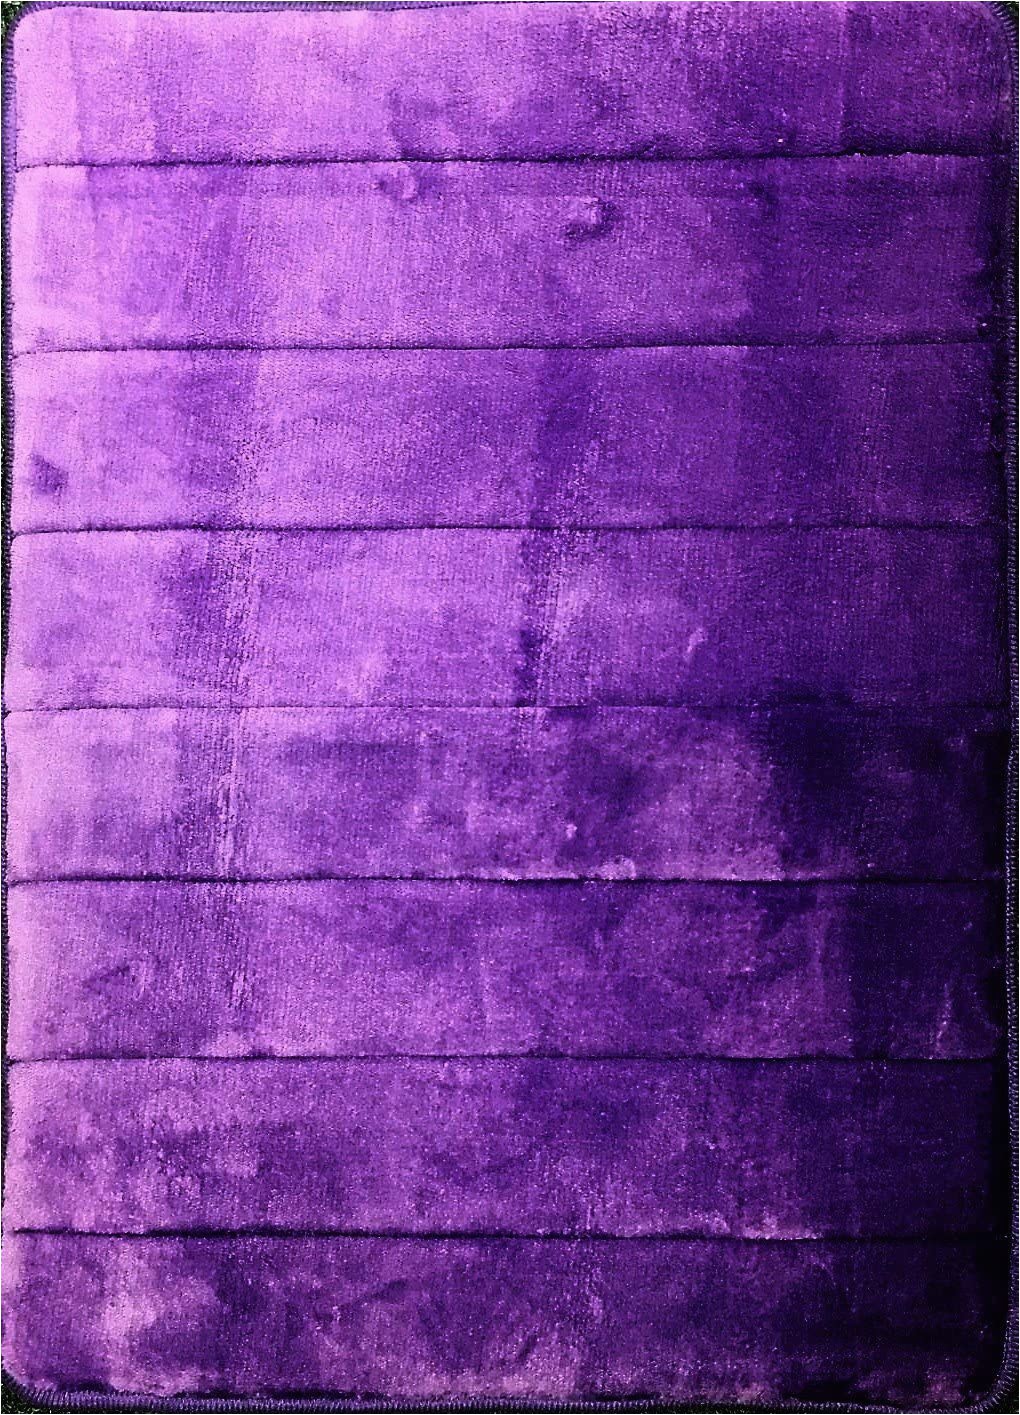 Plum Colored Bath Rugs Purple Memory Foam Mat for Kitchen or Bath Incredibly soft Absorbent Bathroom Rug Sets Non Slip and 17 X 24 Inches